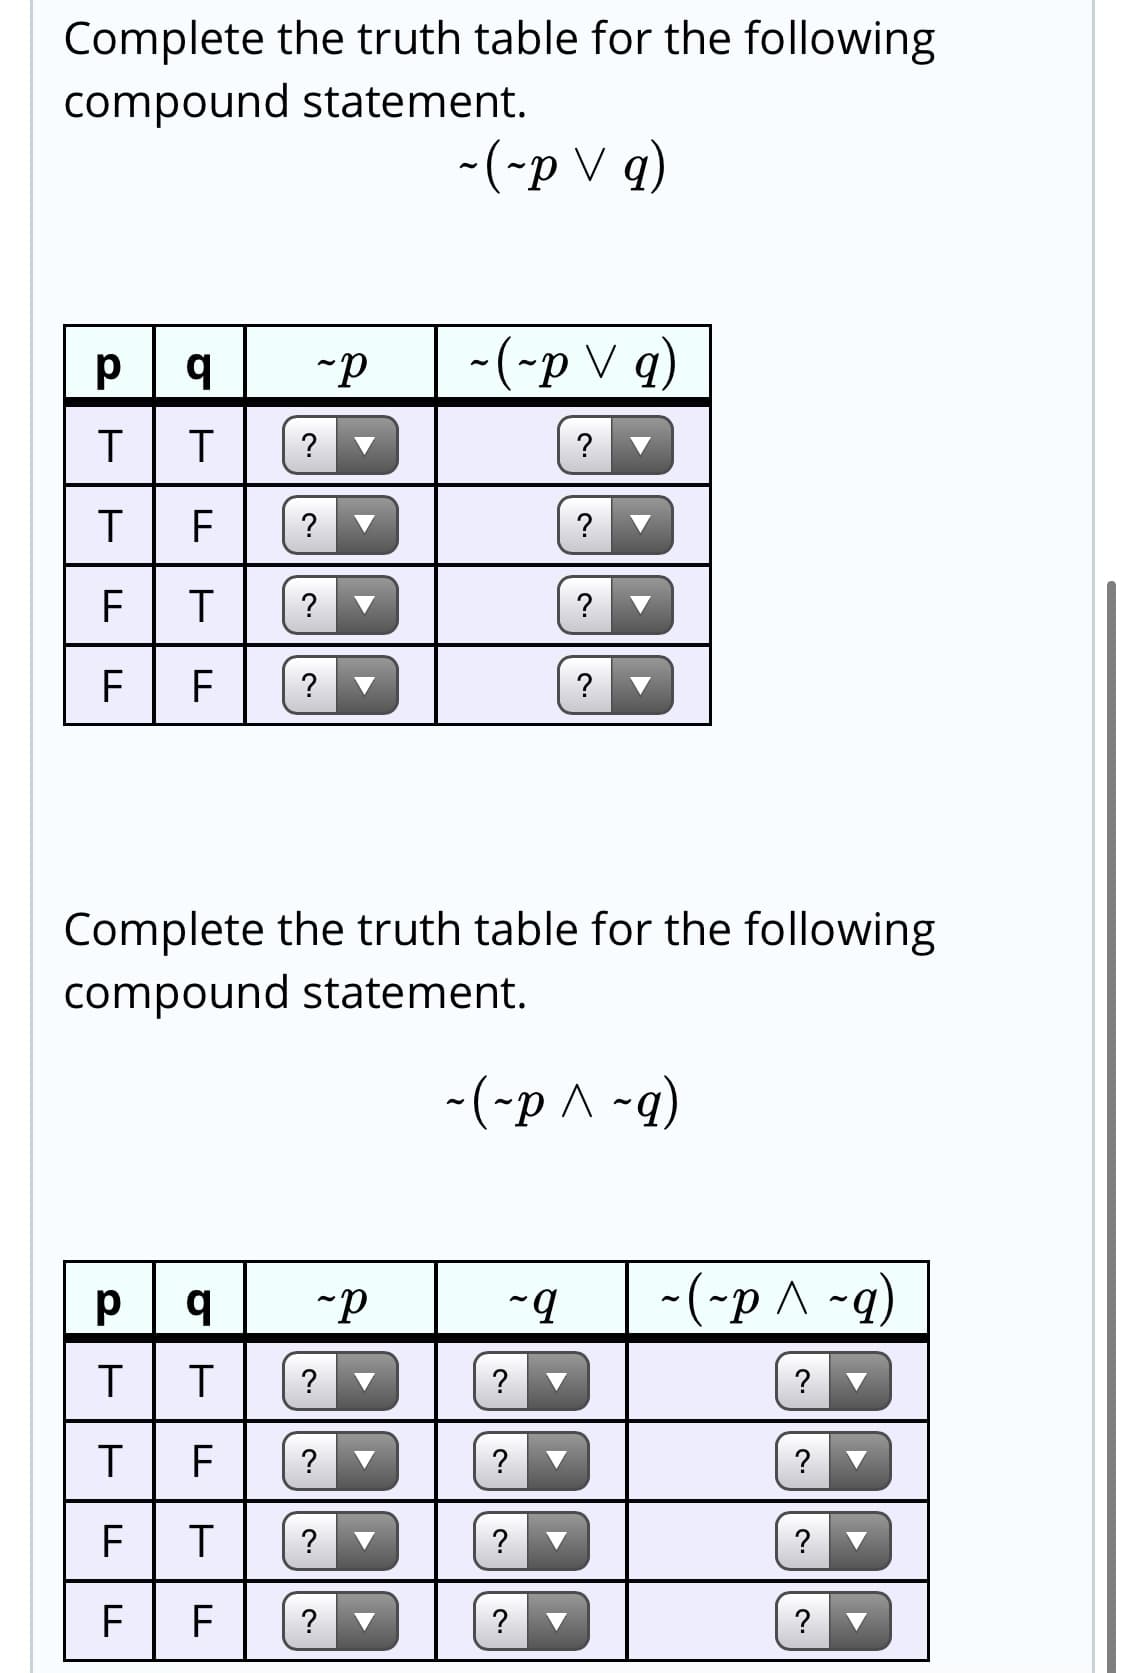 Complete the truth table for the following
compound statement.
-(-p V q)
p
-(-p V q)
T
T
?
?
?
?
?
?
F
F
?
?
Complete the truth table for the following
compound statement.
-(-p ^ -q)
-(-p ^ ~q)
?
?
?
?
?
?
F
EI(?
?
